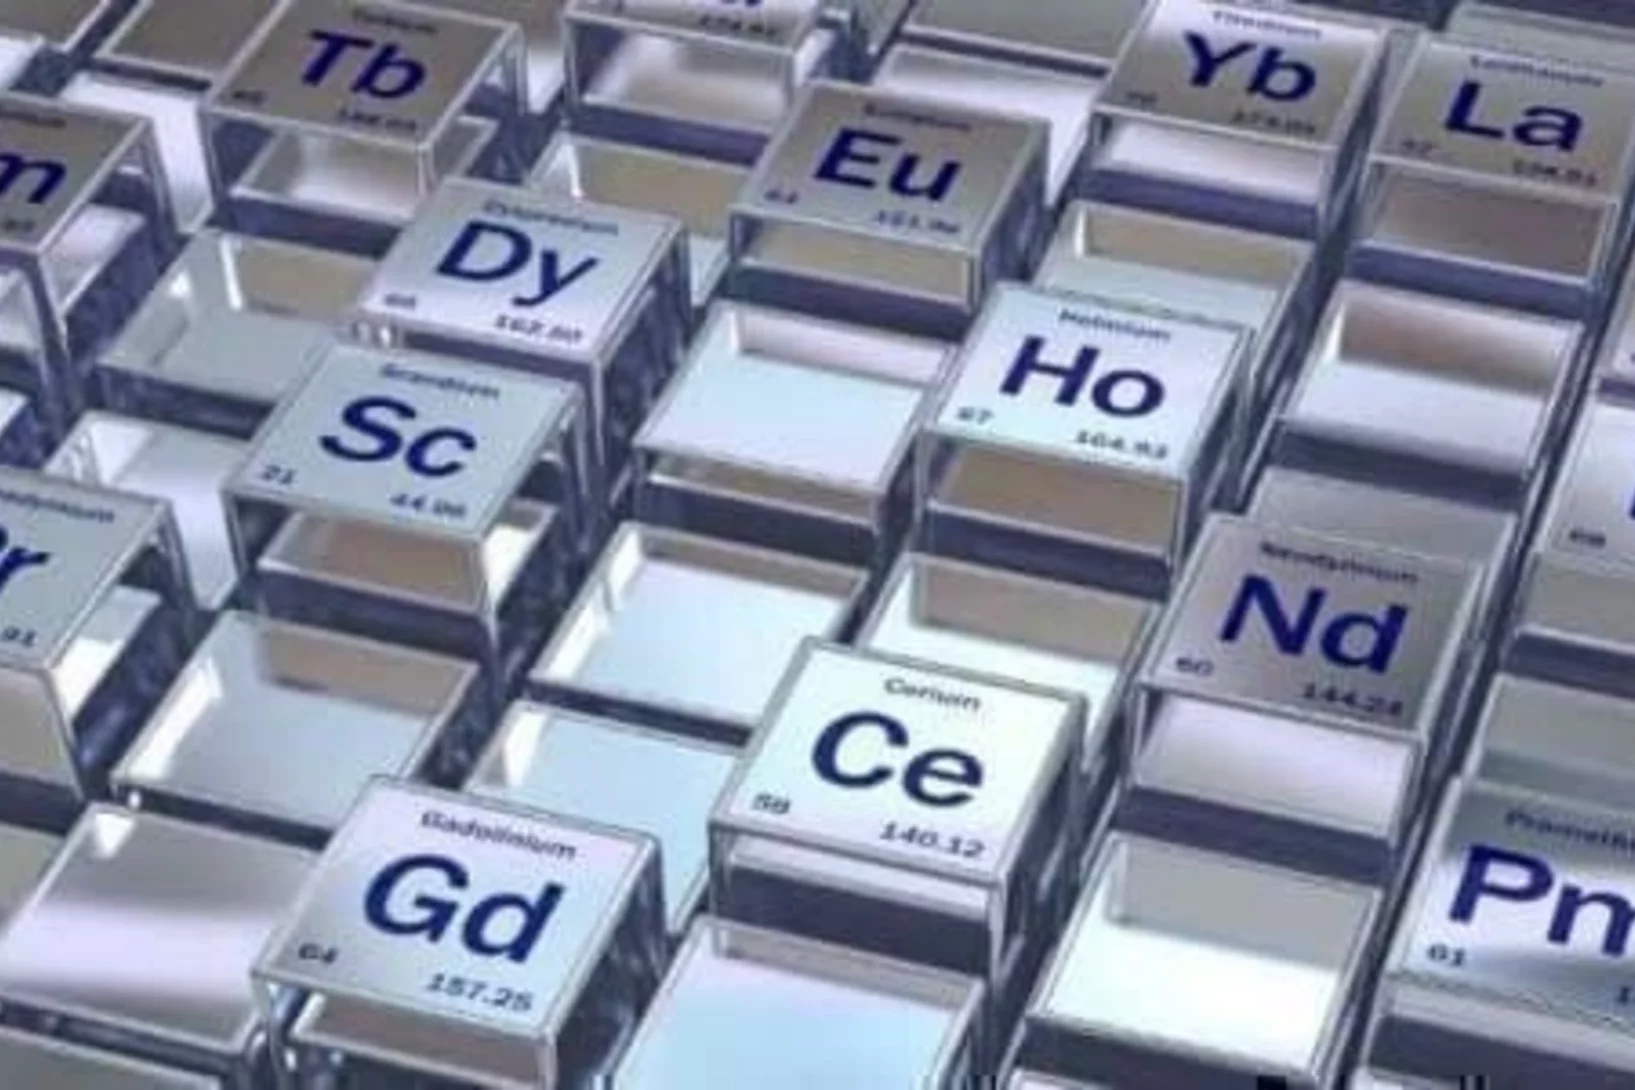 The 17 elements of rare earths